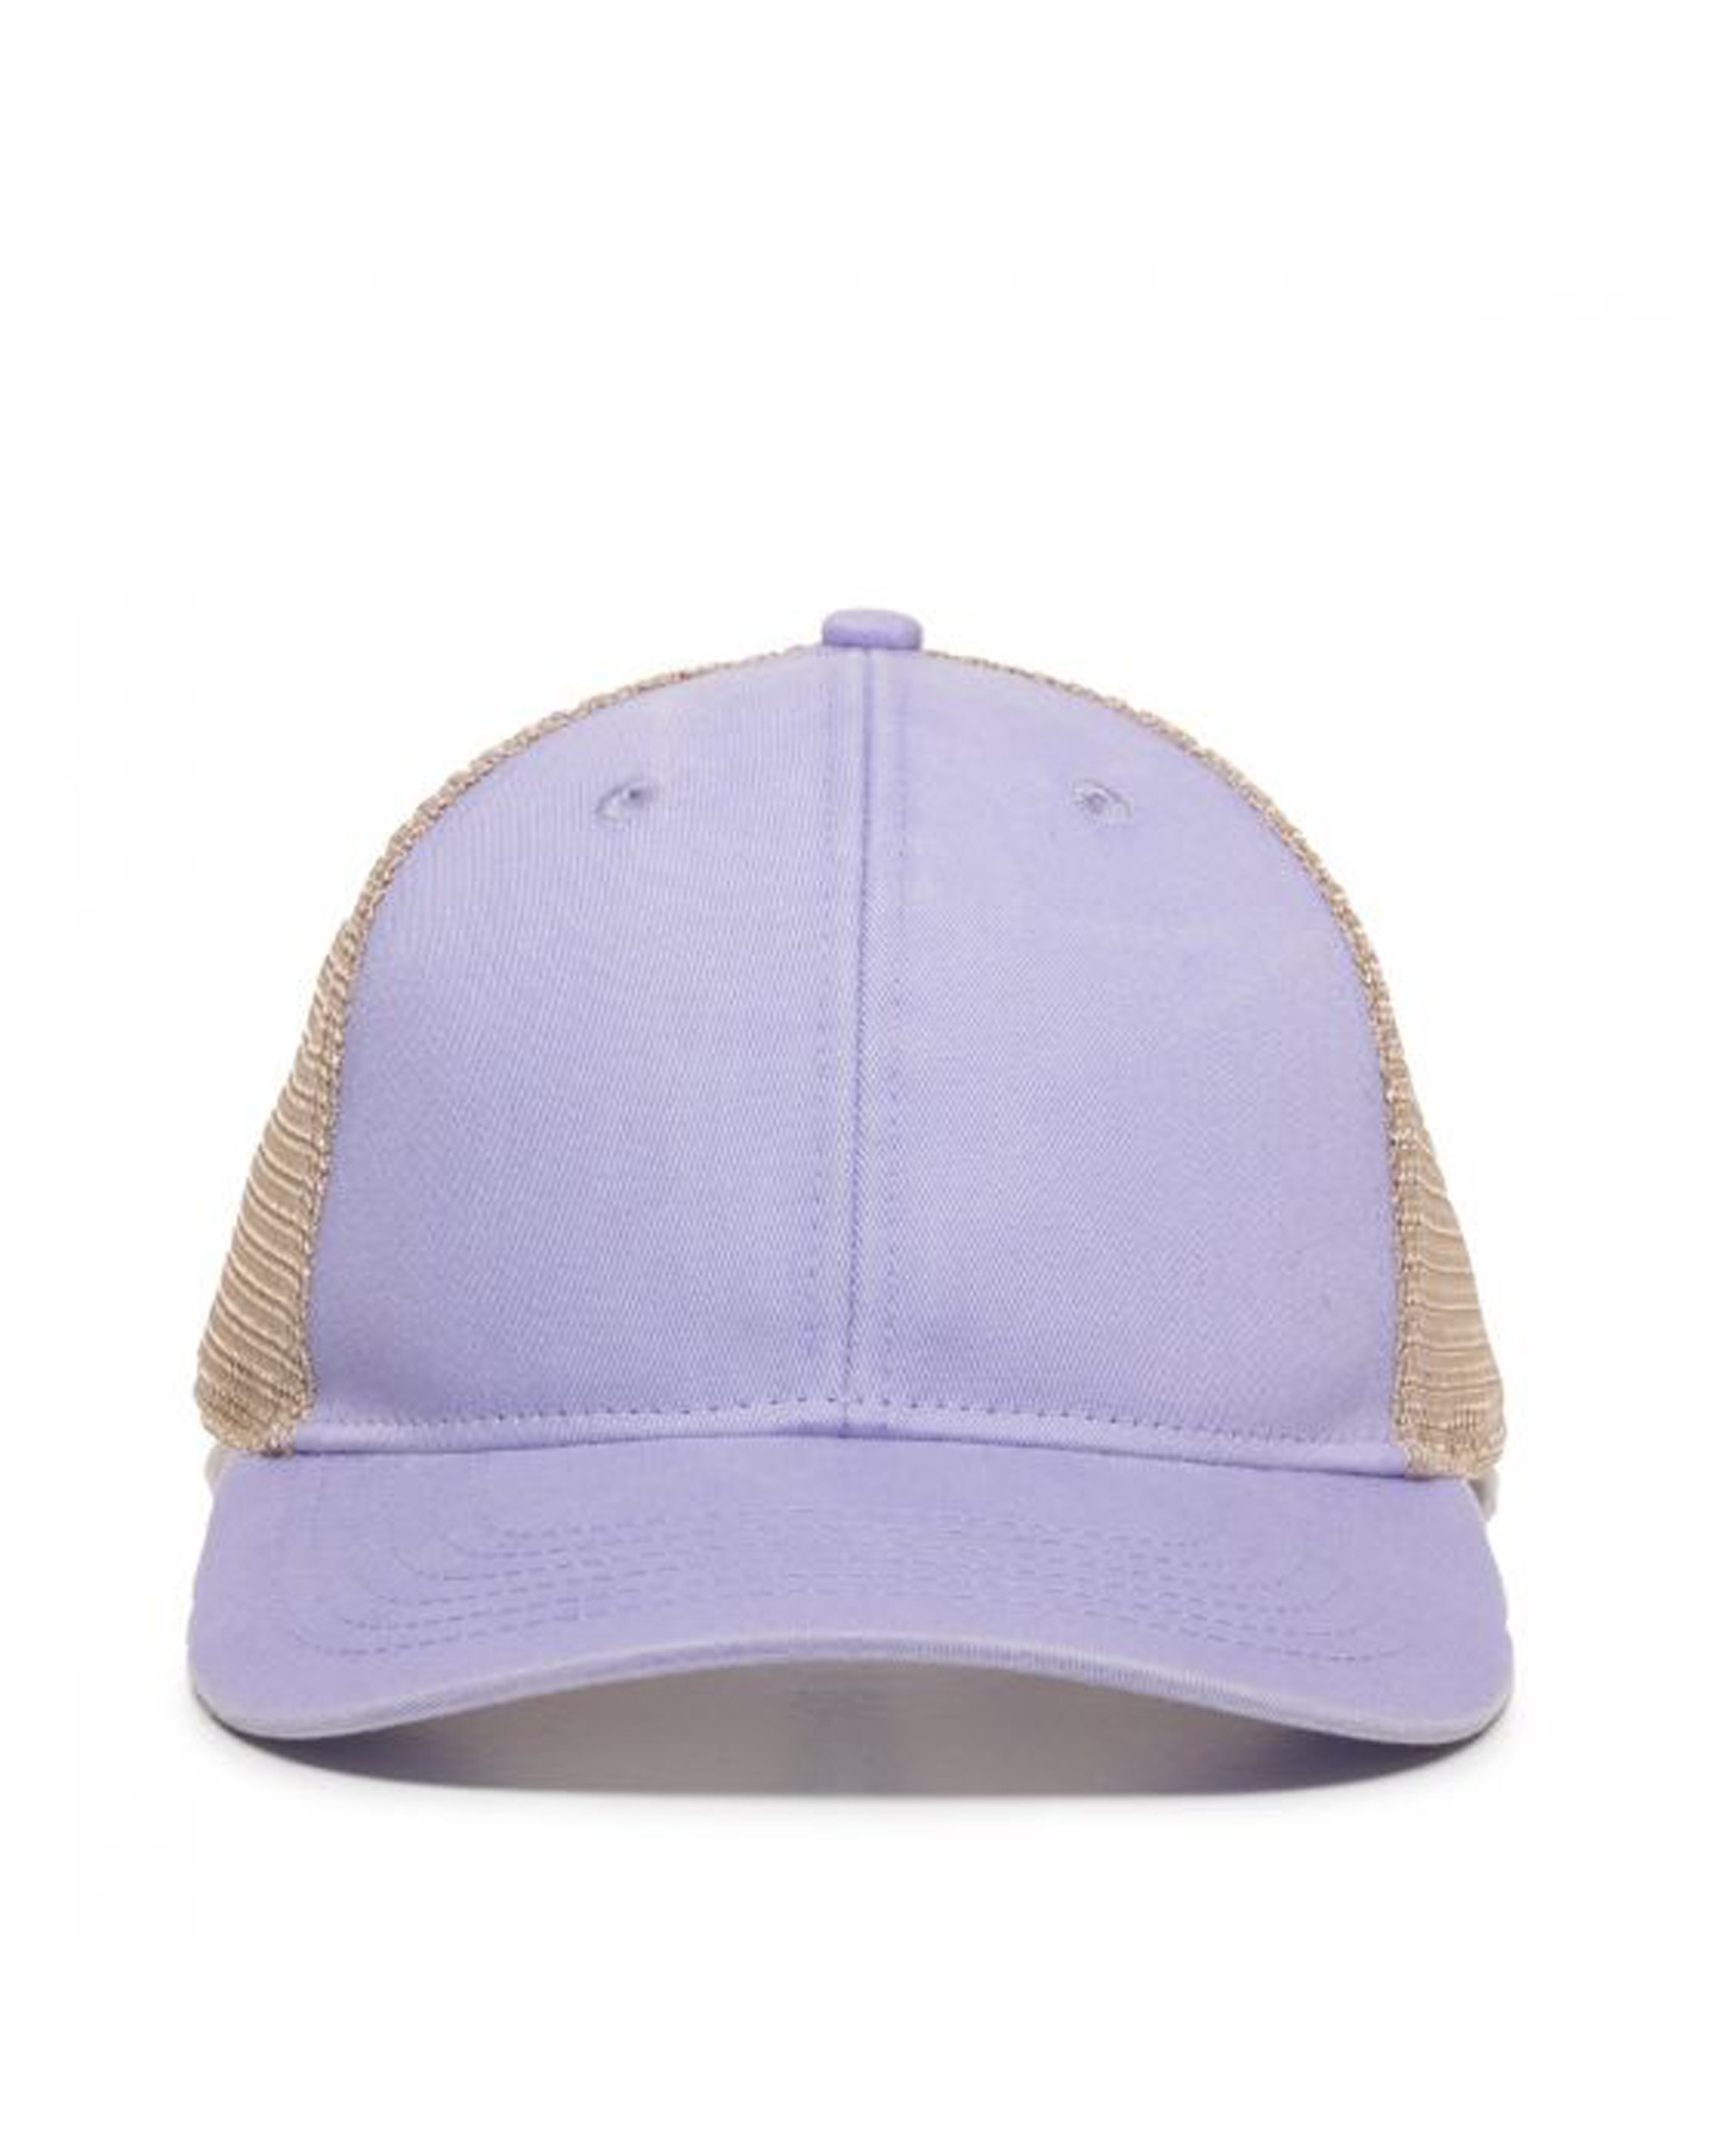 Outdoor Cap PNY100M Ladies Fit with Ponytail Mesh Back